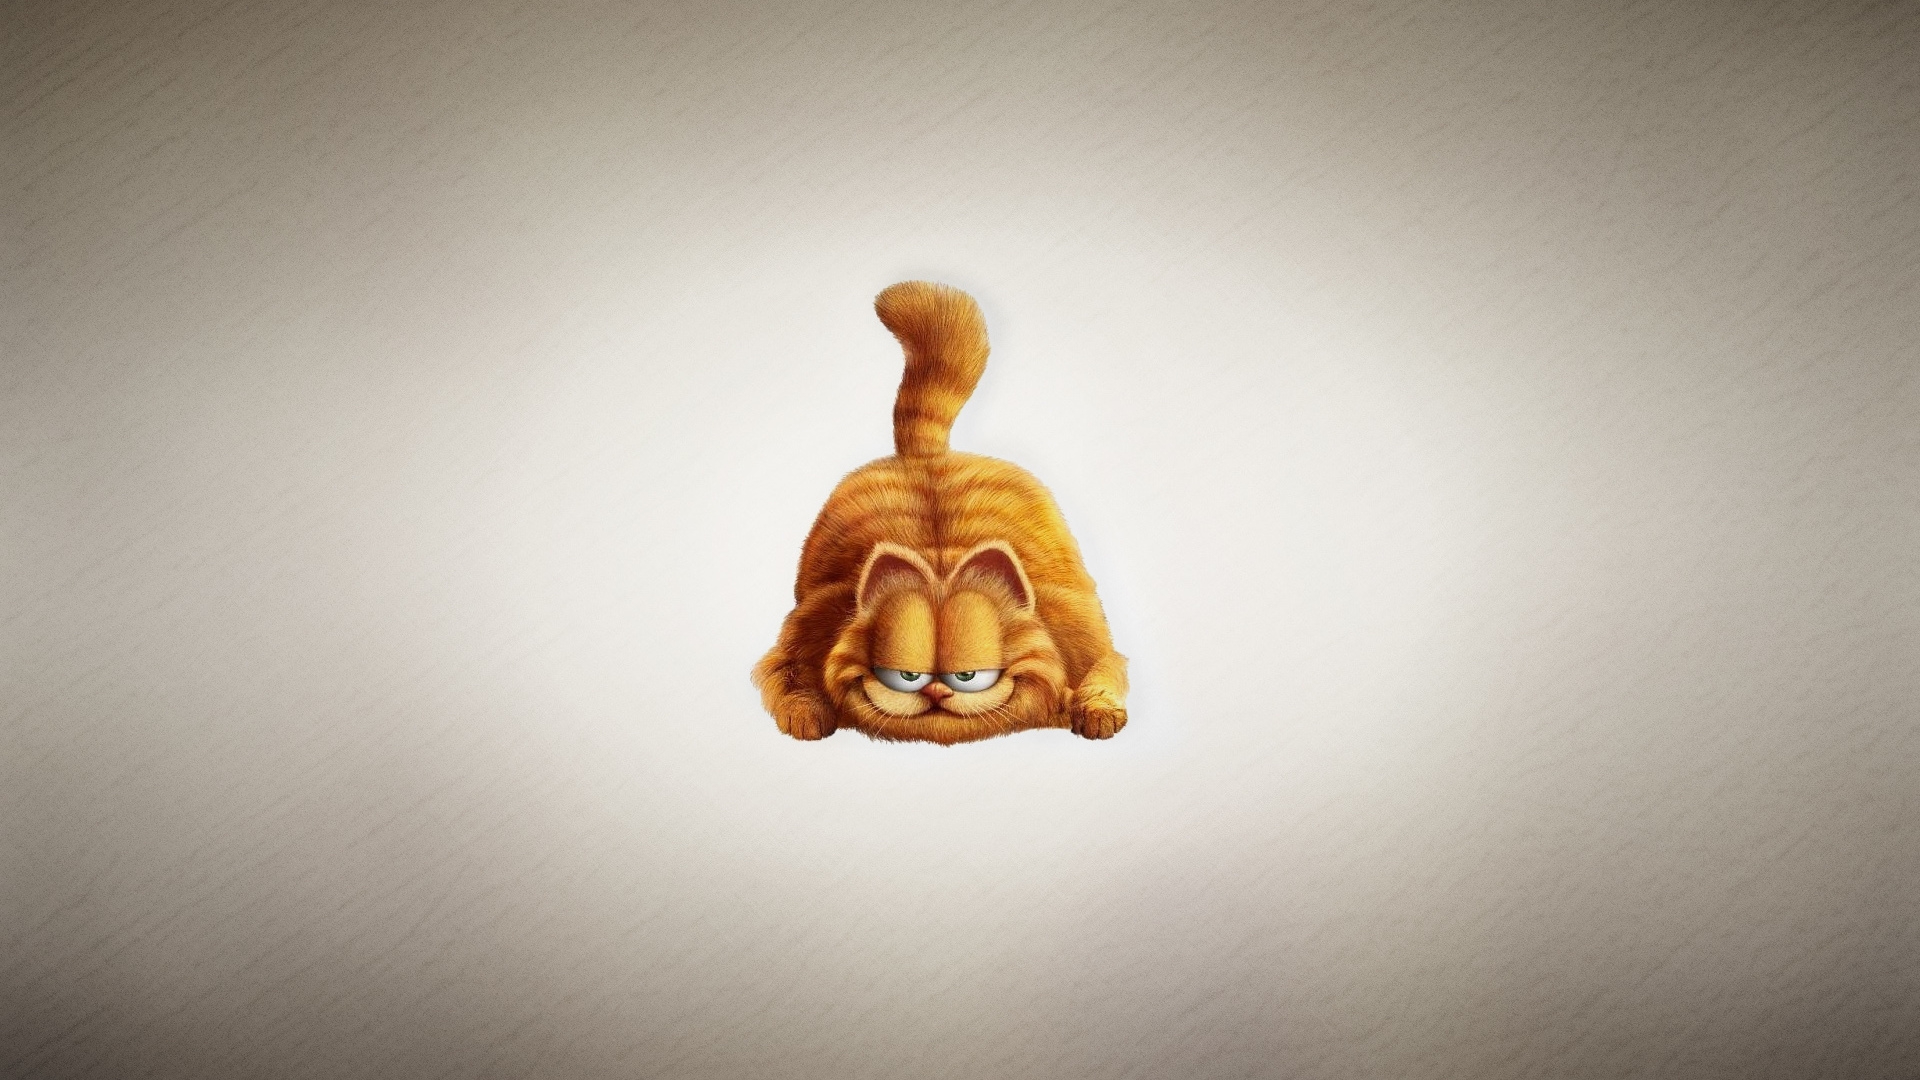 Garfield The Cat for 1920 x 1080 HDTV 1080p resolution